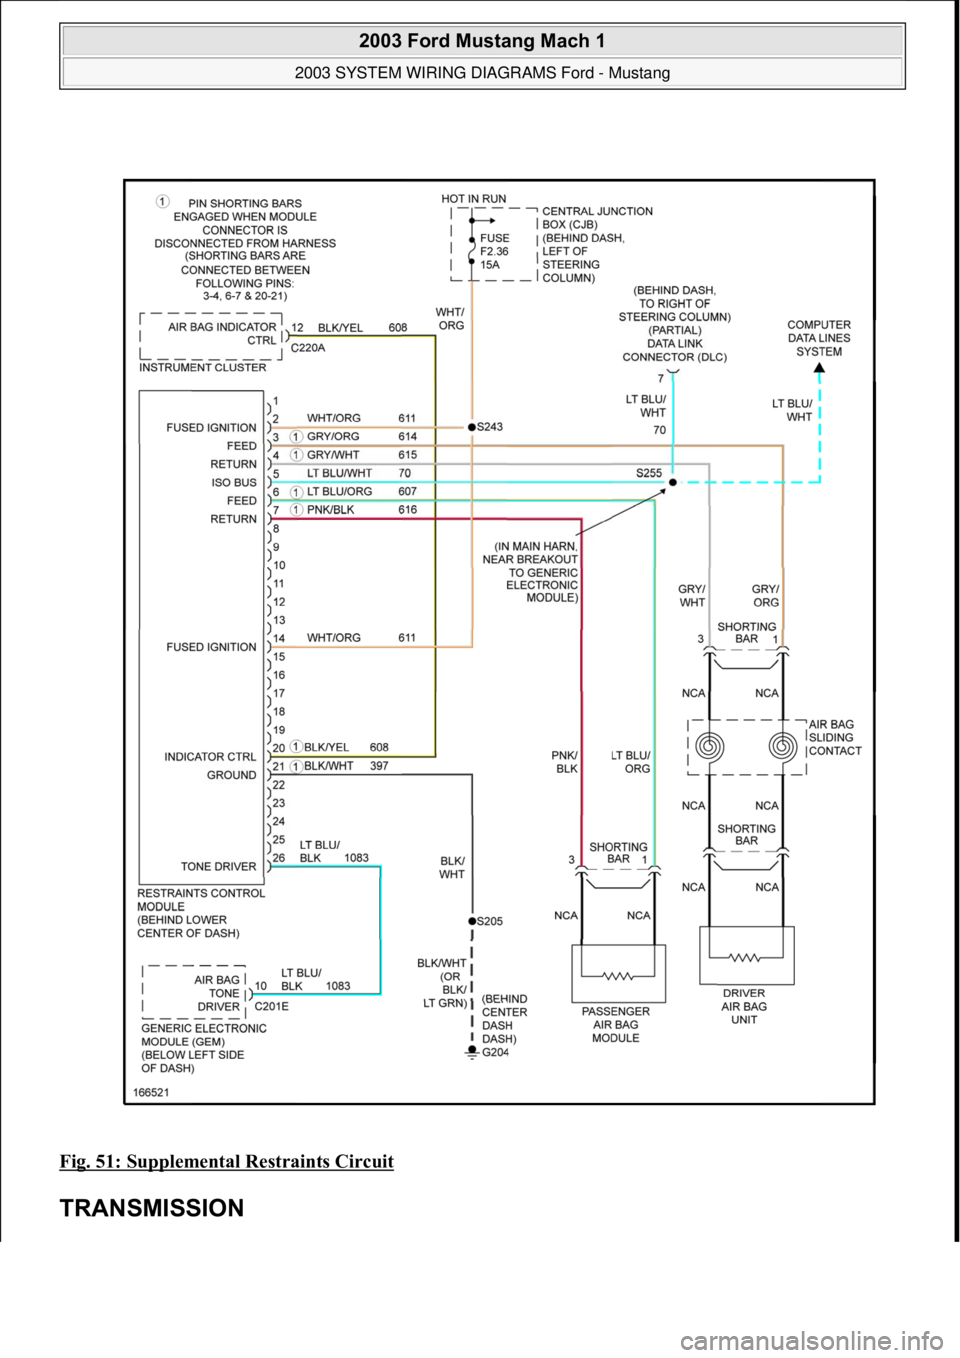 FORD MUSTANG 2003  Workshop Manual Fig. 51: Supplemental Restraints Circuit 
TRANSMISSION 
 
2003 Ford Mustang Mach 1 
2003 SYSTEM WIRING DIAGRAMS Ford - Mustang  
111  
18 ноября  2011 г. 12:54:33Page 52 © 2006 Mitchell Repair